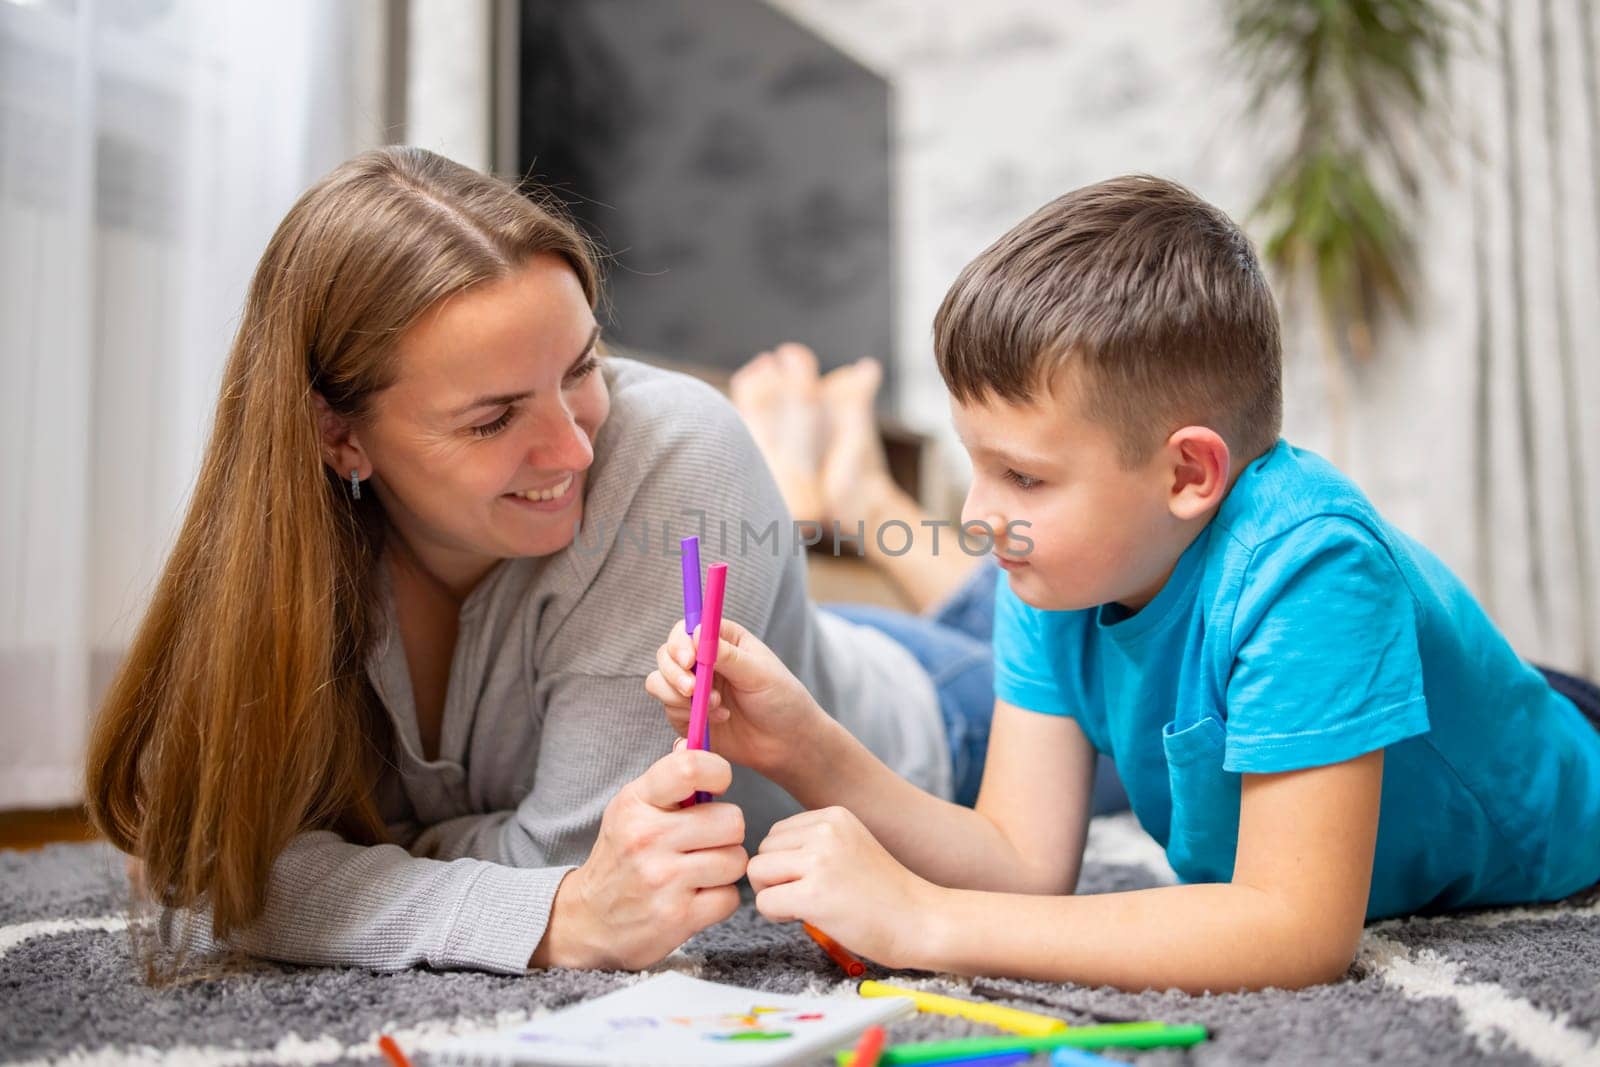 Happy family playing together at home on floor. Mother and her son painting together